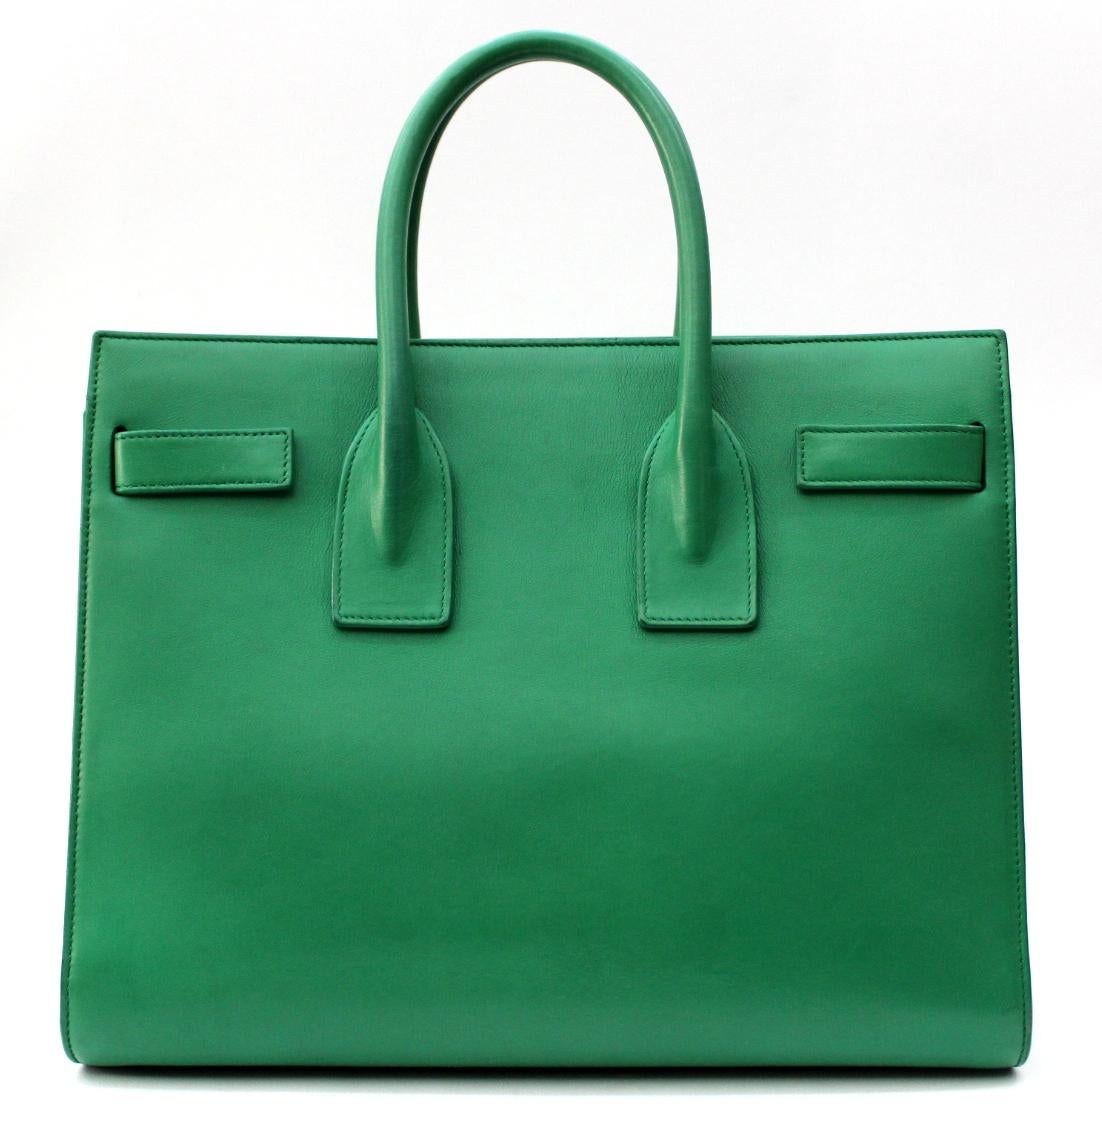 Beautiful Yves Saint Laurent bag, Sac de Jour model. It is made of smooth leather in a particular color like mint green. The bag is equipped with a long strap that allows you to wear the shoulder bag or shoulder bag. The conditions are excellent and